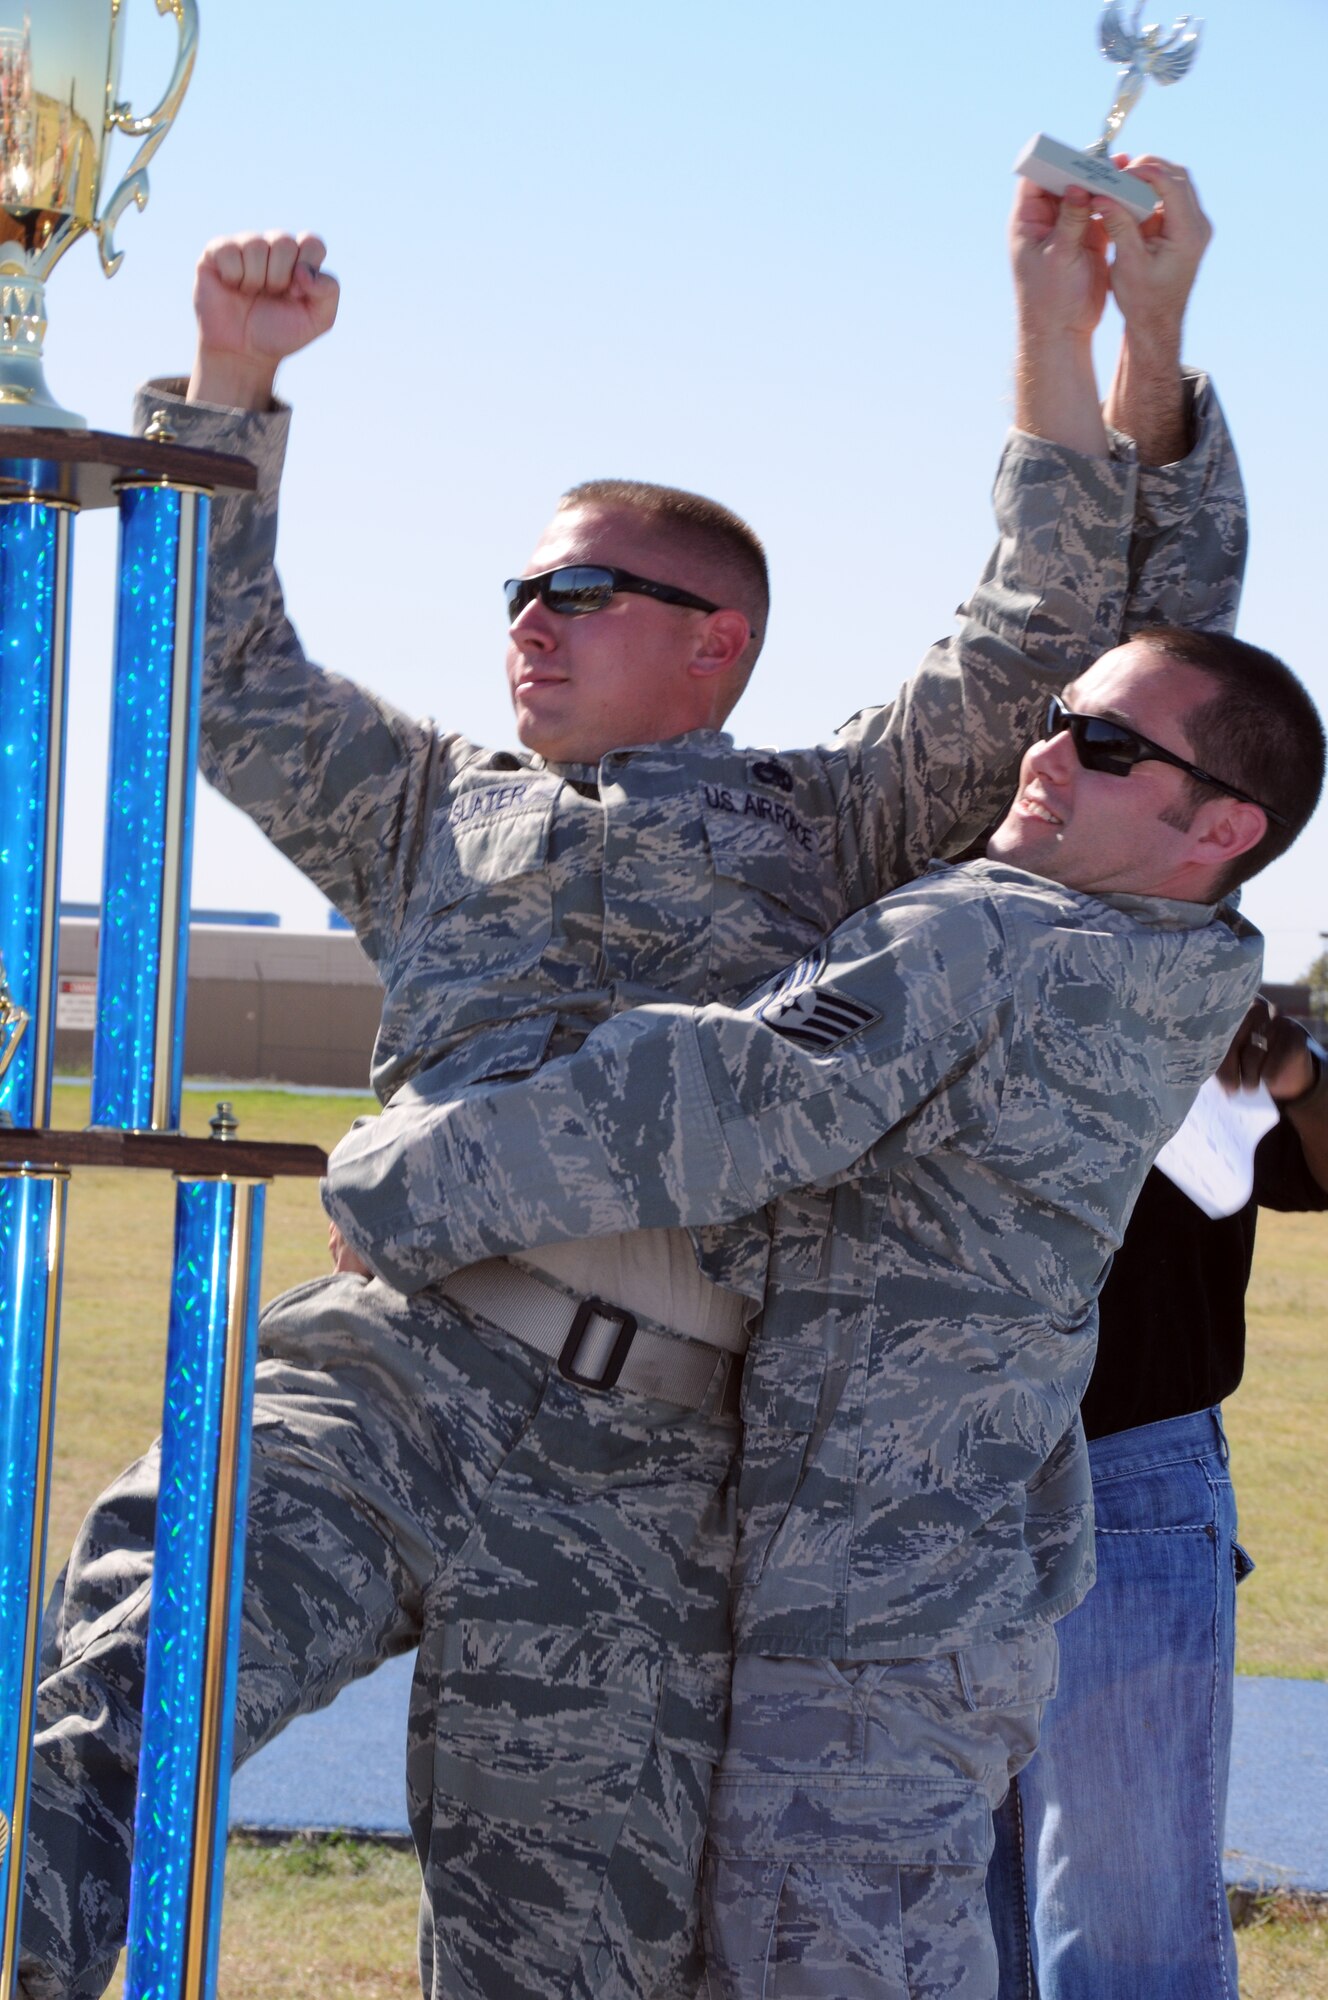 U.S. Air Force guardsmen assigned to the 137th Maintenance Squadron celebrate a commanding victory in the 3 legged race held on base, Oct 1. "This was one of the proudest moments of my career, said Staff Sgt Chris Howard. "I would like to thank my partner Tech Sgt Slater for his continued support throughout the race."
(U.S. Air Force Photo by Staff Sgt Caroline Hayworth/Released)